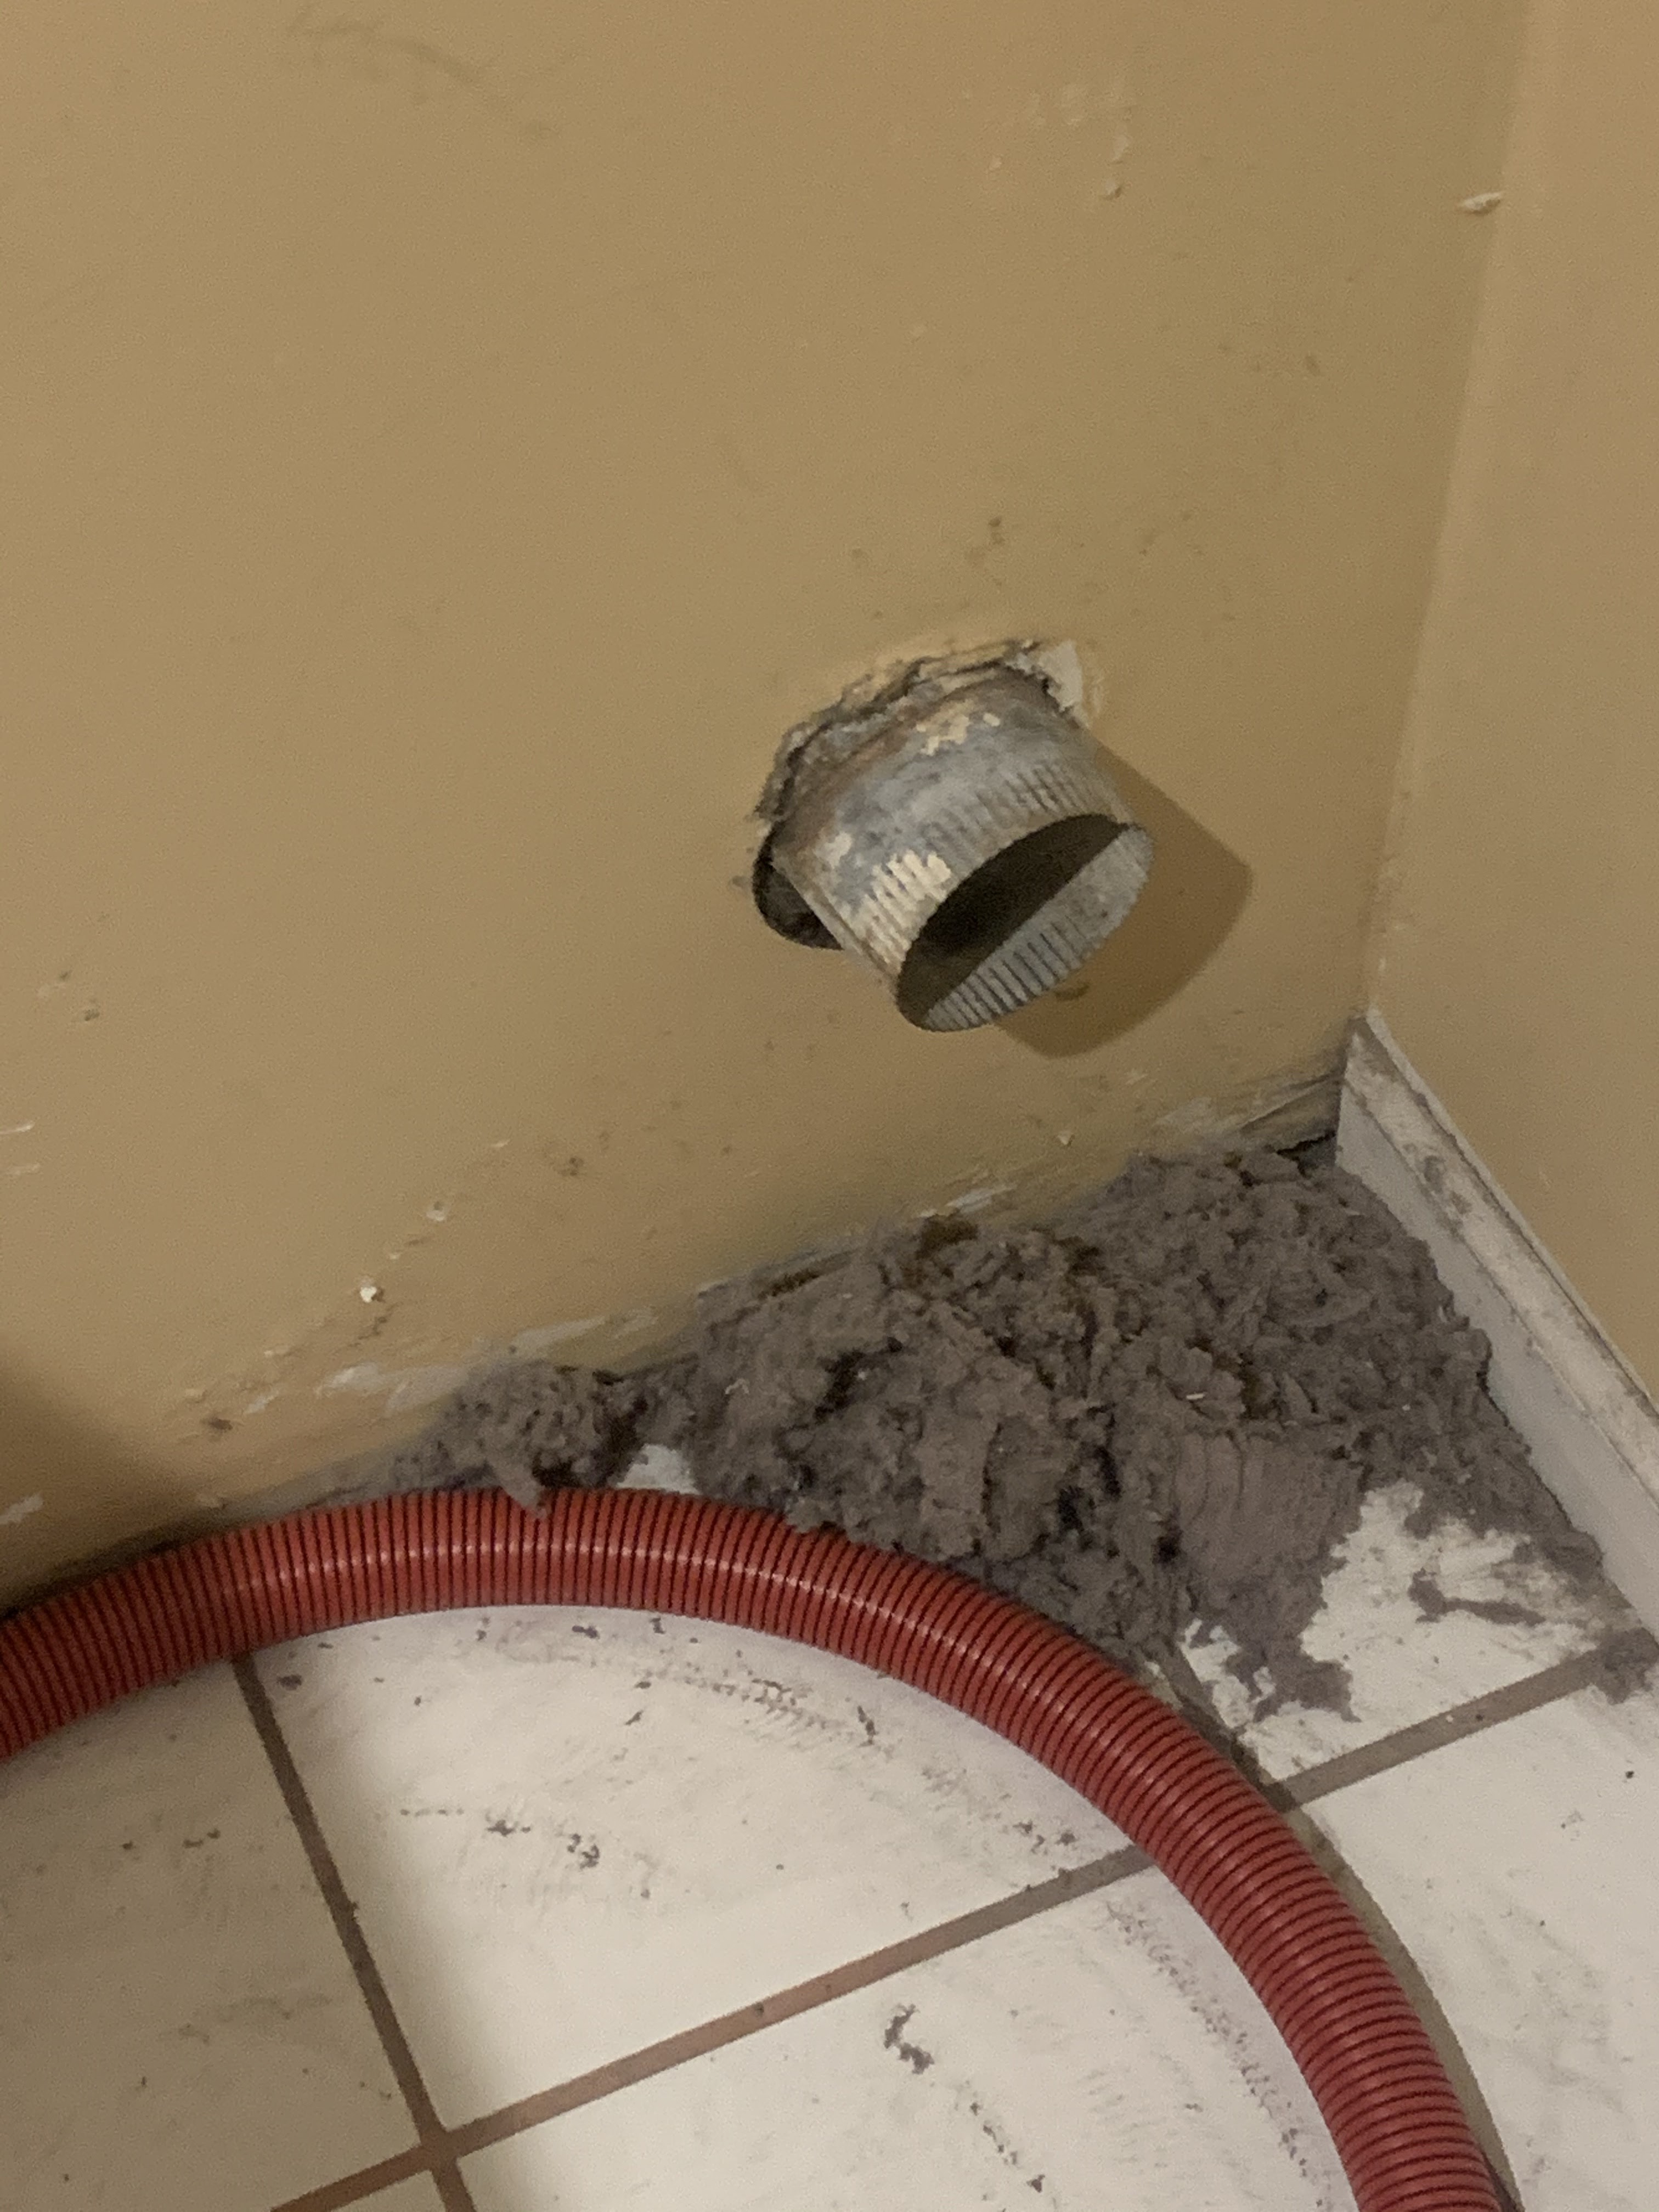 Another clean dryer vent! Did you know you are suppose to have your dryer vent cleaned once a year to prevent fire hazards? 